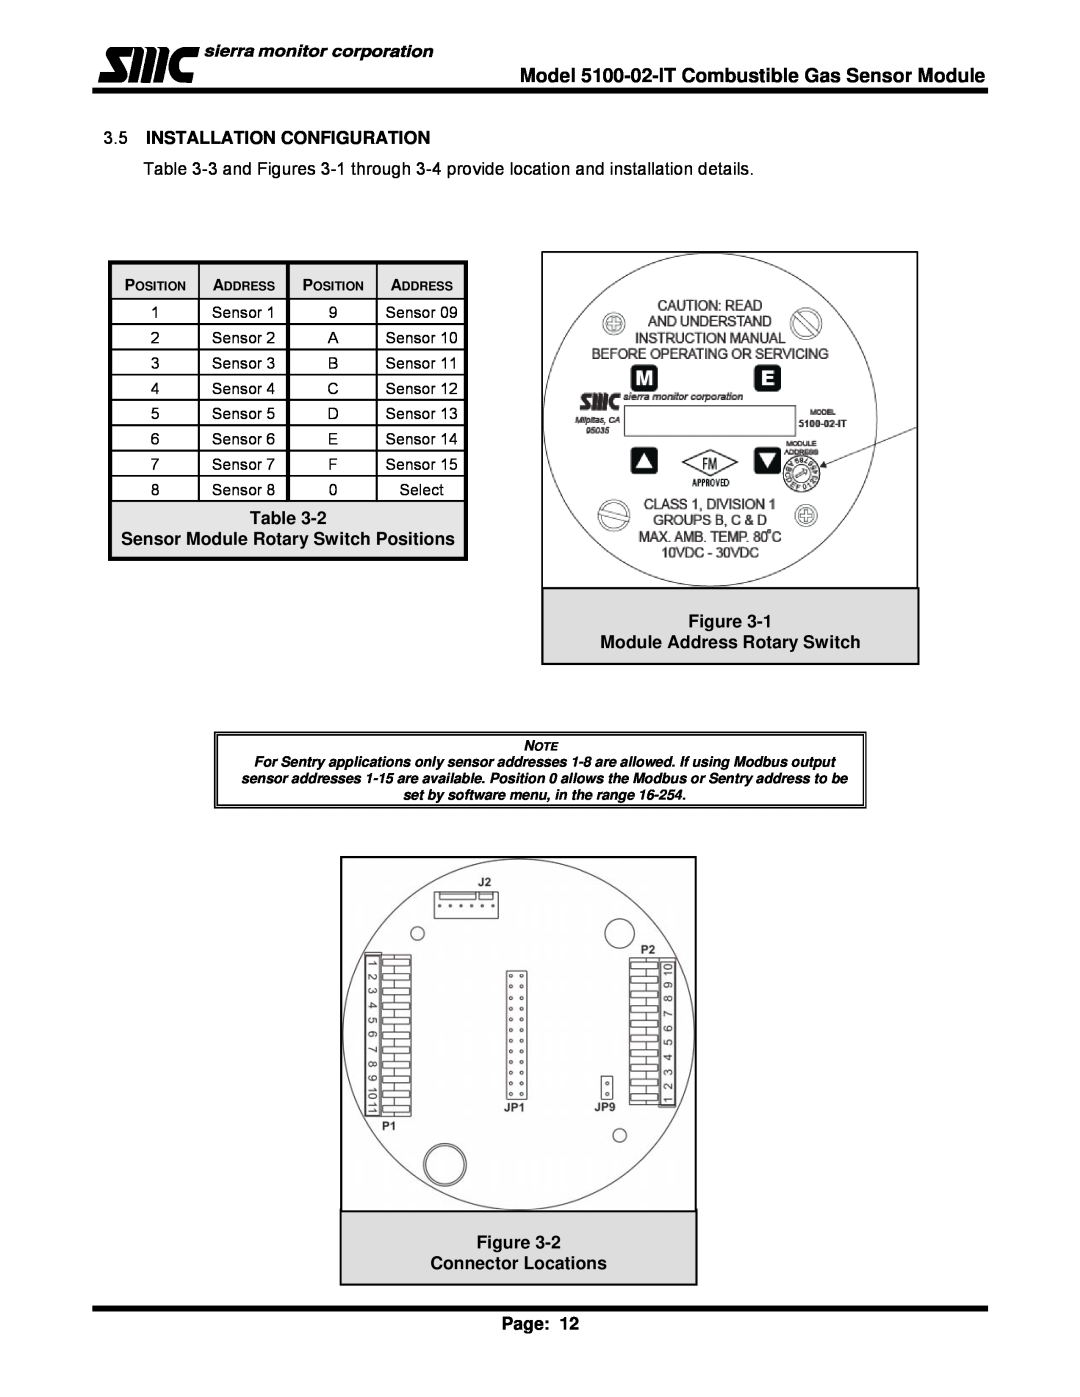 Univex IT Series, 5100-02-IT instruction manual 3.5INSTALLATION CONFIGURATION, Table Sensor Module Rotary Switch Positions 